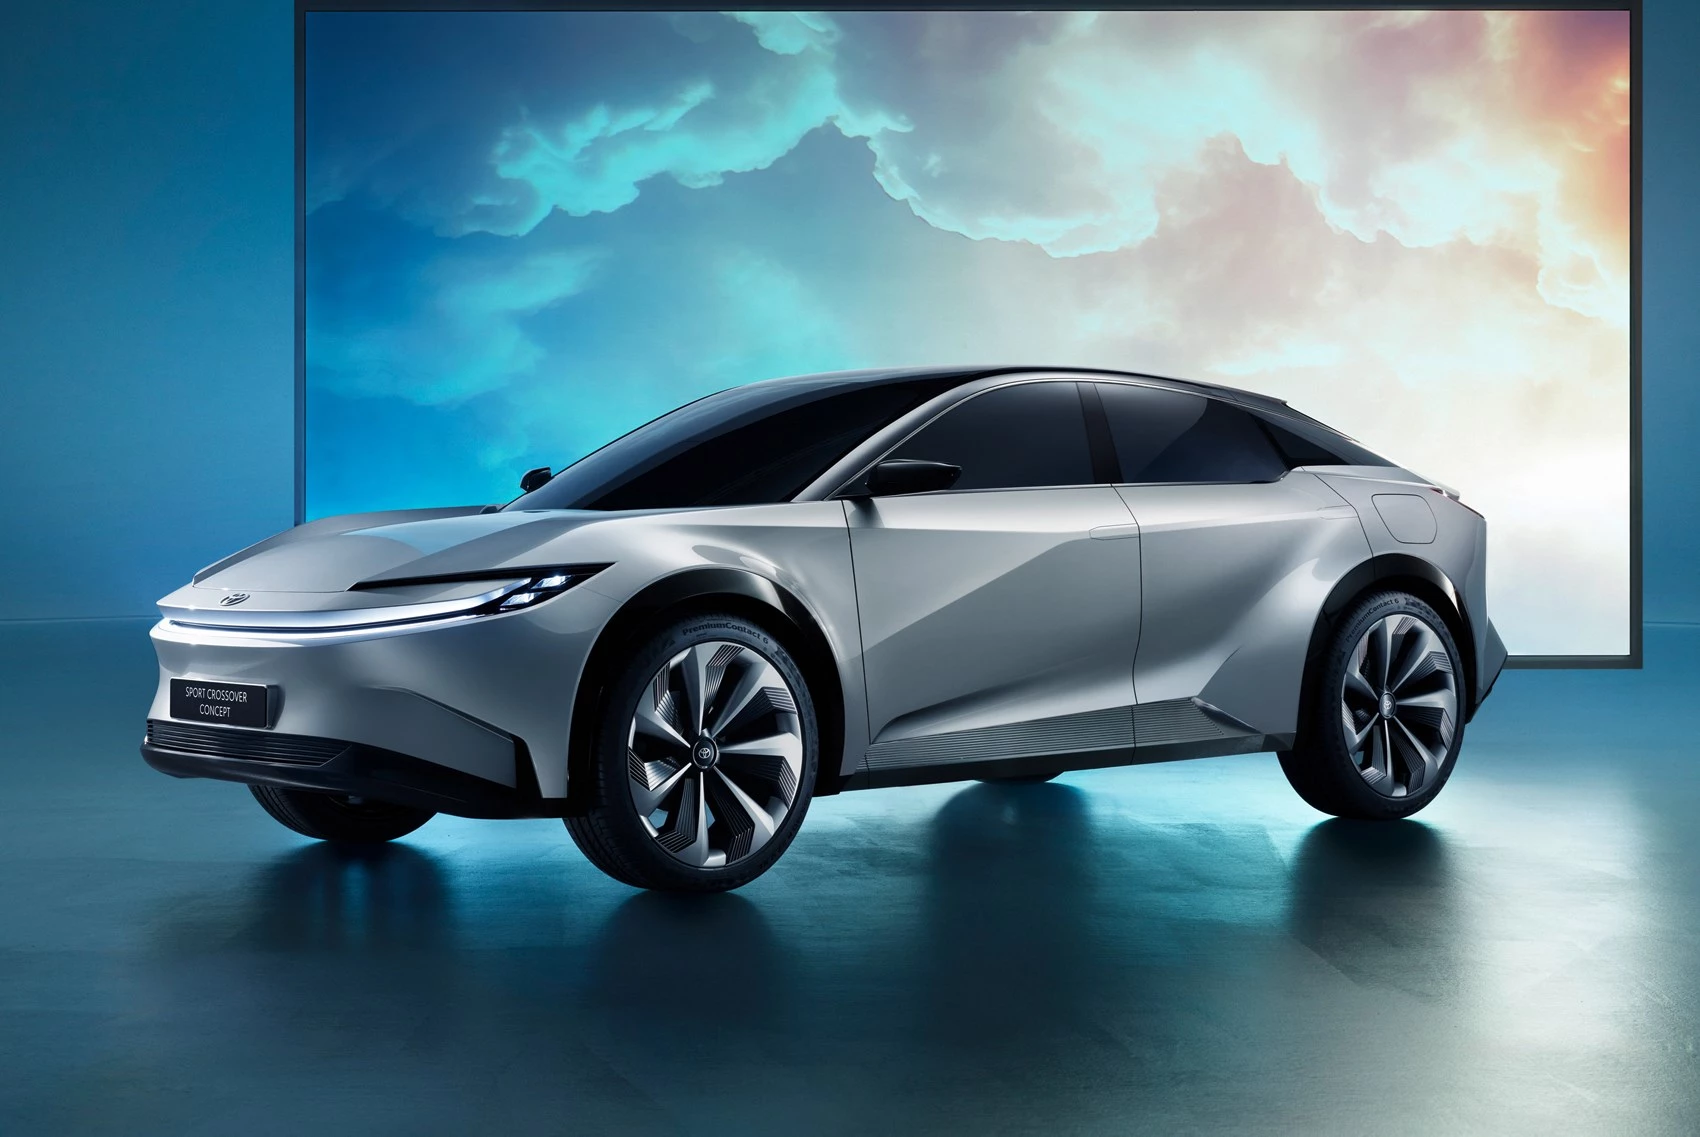 News Landing Image A New Concept Model - Toyota Sport Crossover Will Join the Line of Electrified Toyota models from 2025